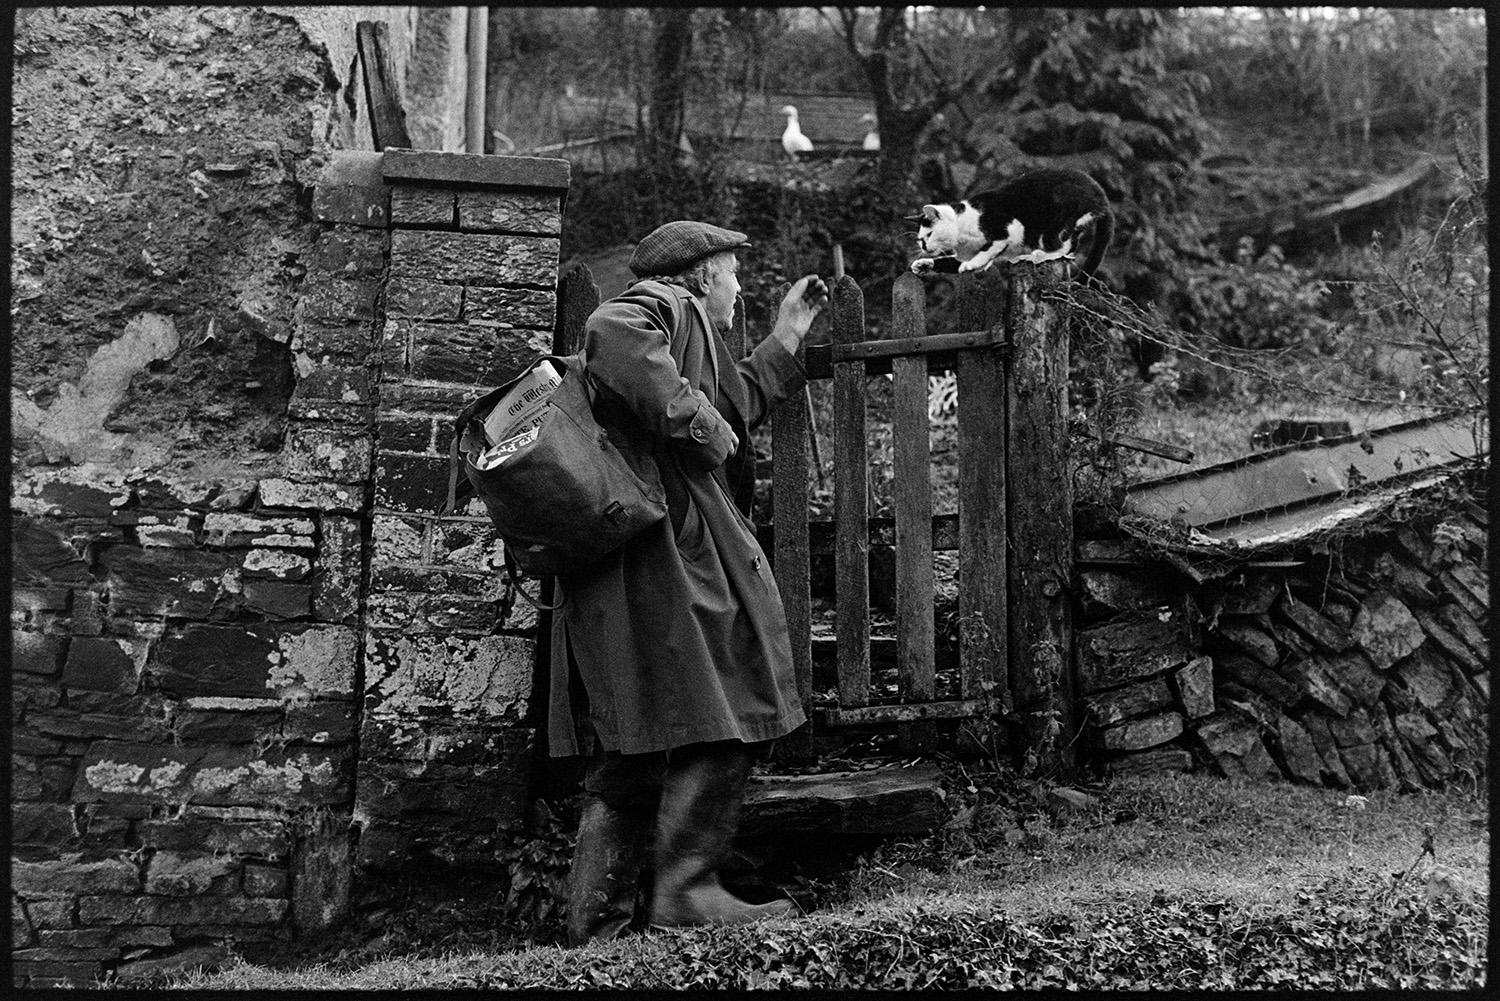 Farmworker returning home to greet cat on gate. 
[Ivor Brock greeting his cat sat on his gatepost at Millhams, Dolton, as he returns home from work. He is carrying a rucksack on his shoulder.]